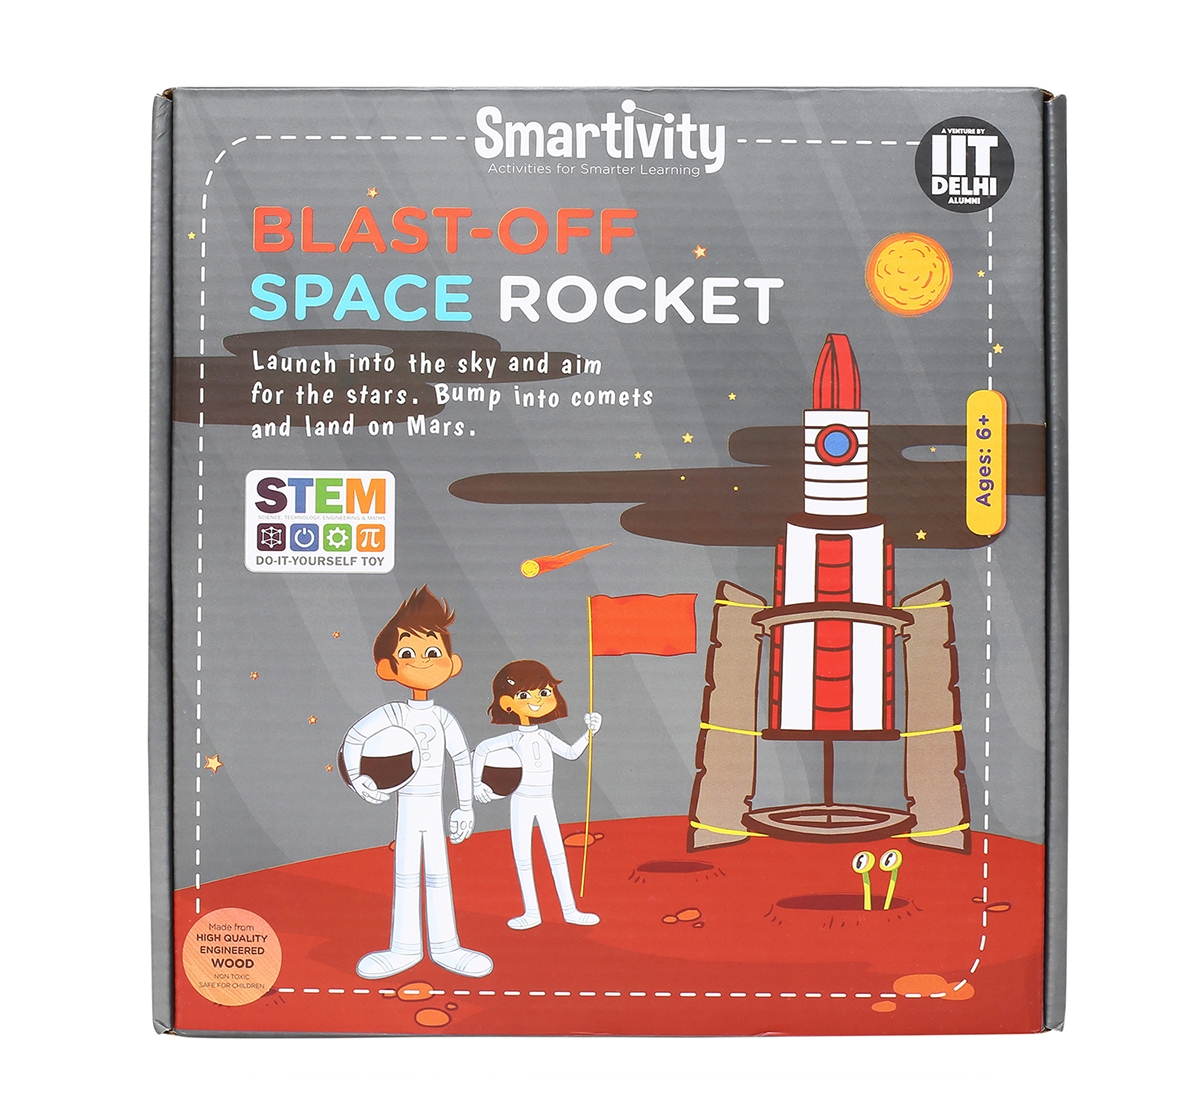 Smartivity | Smartivity Space Rocket Blast-off Action STEM Toy, Educational & Construction based DIY Fun Activity Game for Kids 6 to 14, Gifts for Boys & Girls, Learn Science Engineering Project, Made in India